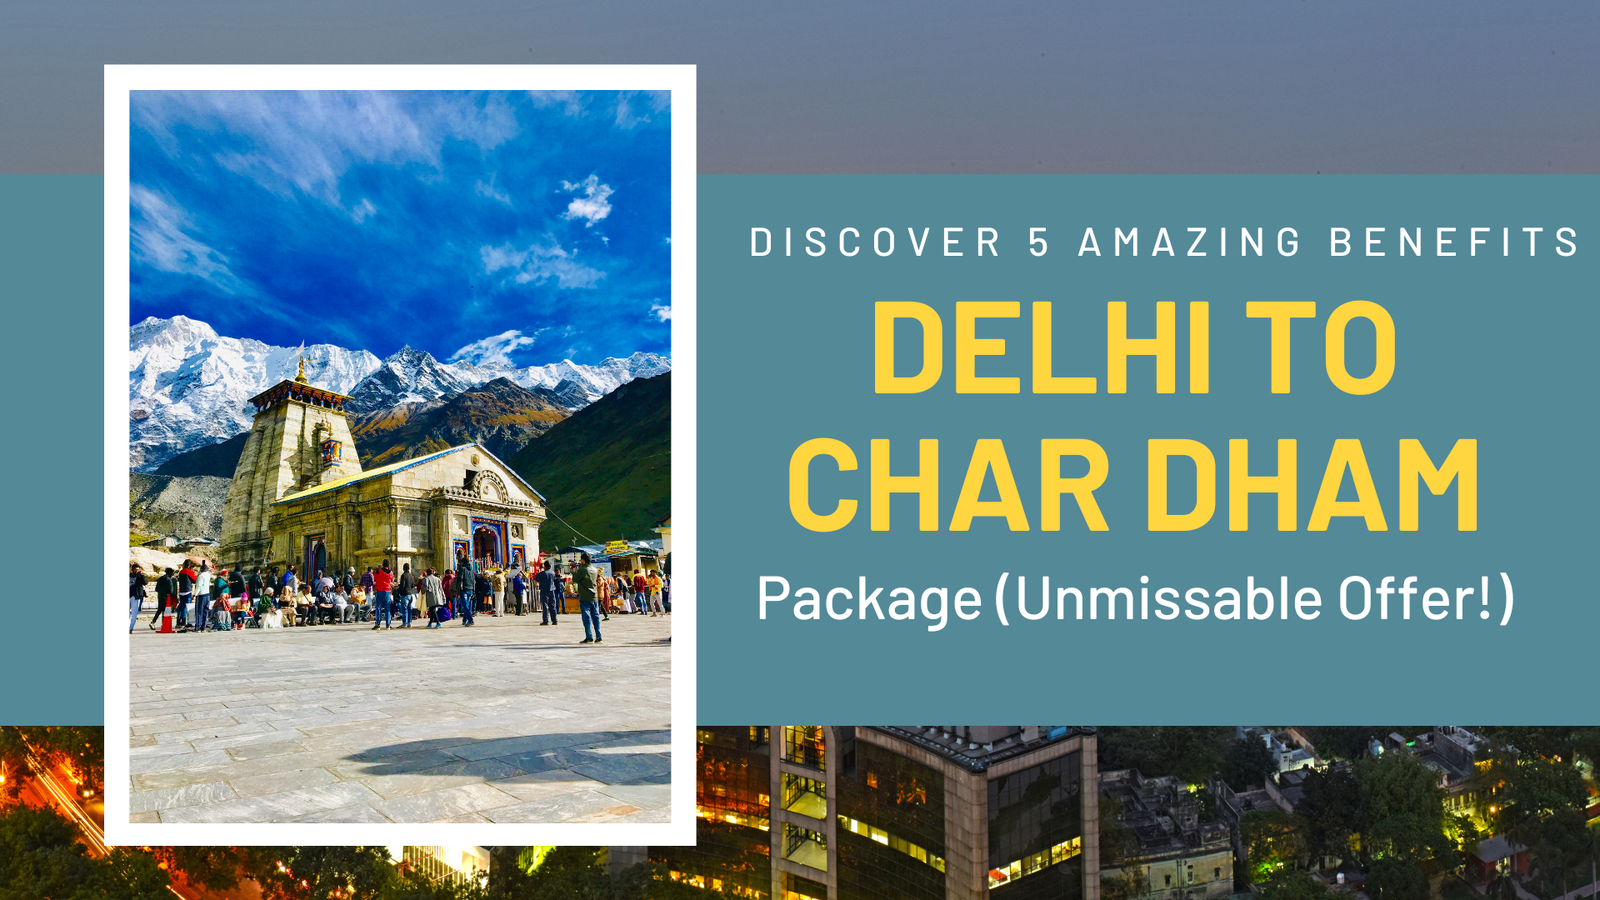 Discover 5 Amazing Benefits of Our Delhi to Char Dham Package